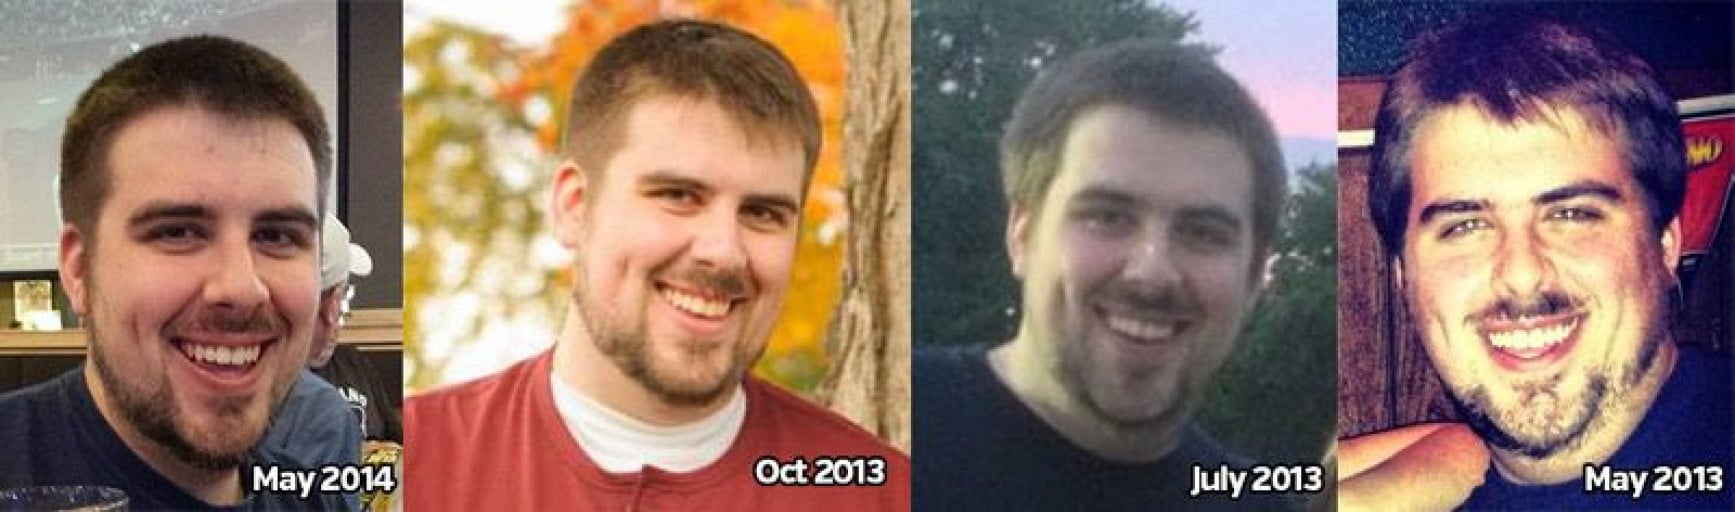 A progress pic of a 6'2" man showing a weight reduction from 275 pounds to 225 pounds. A net loss of 50 pounds.